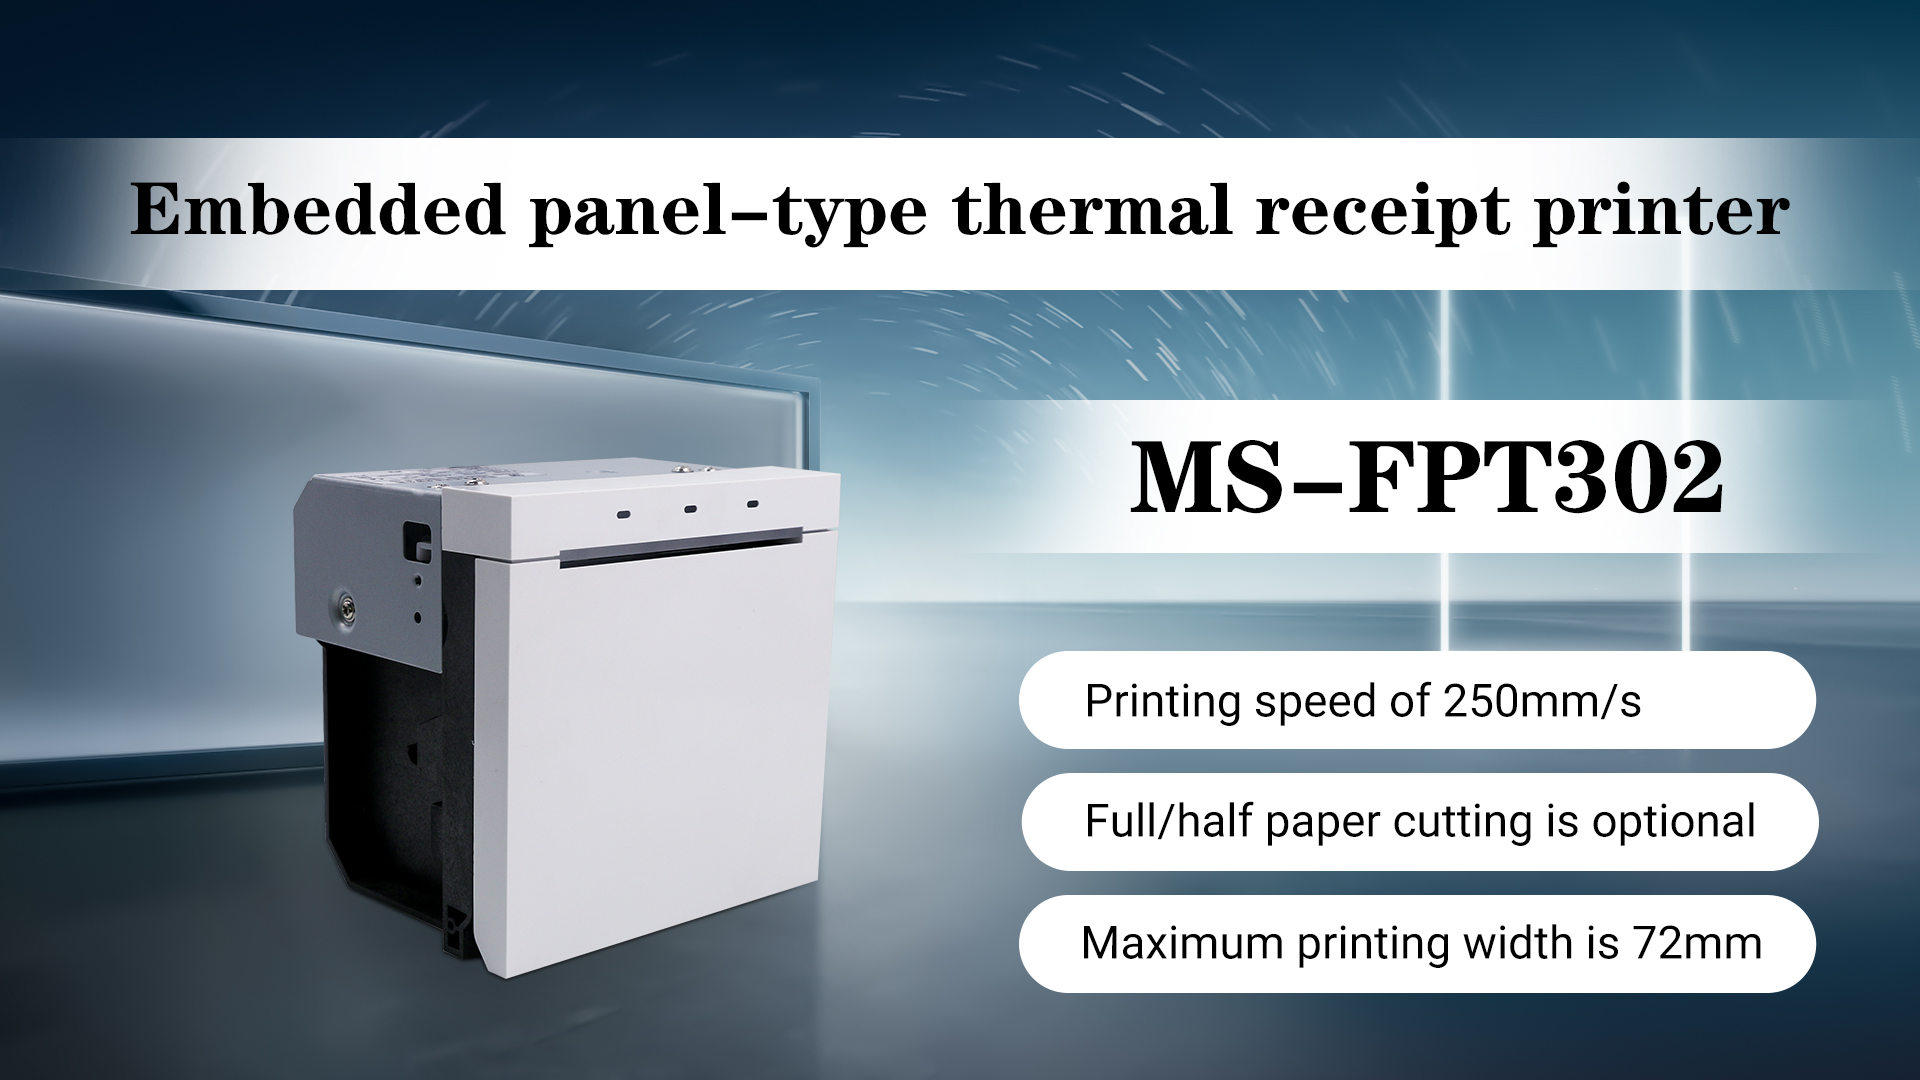 MASUNG 80mm panel receipt printer MS-FPT302 is used in self-service ordering machines